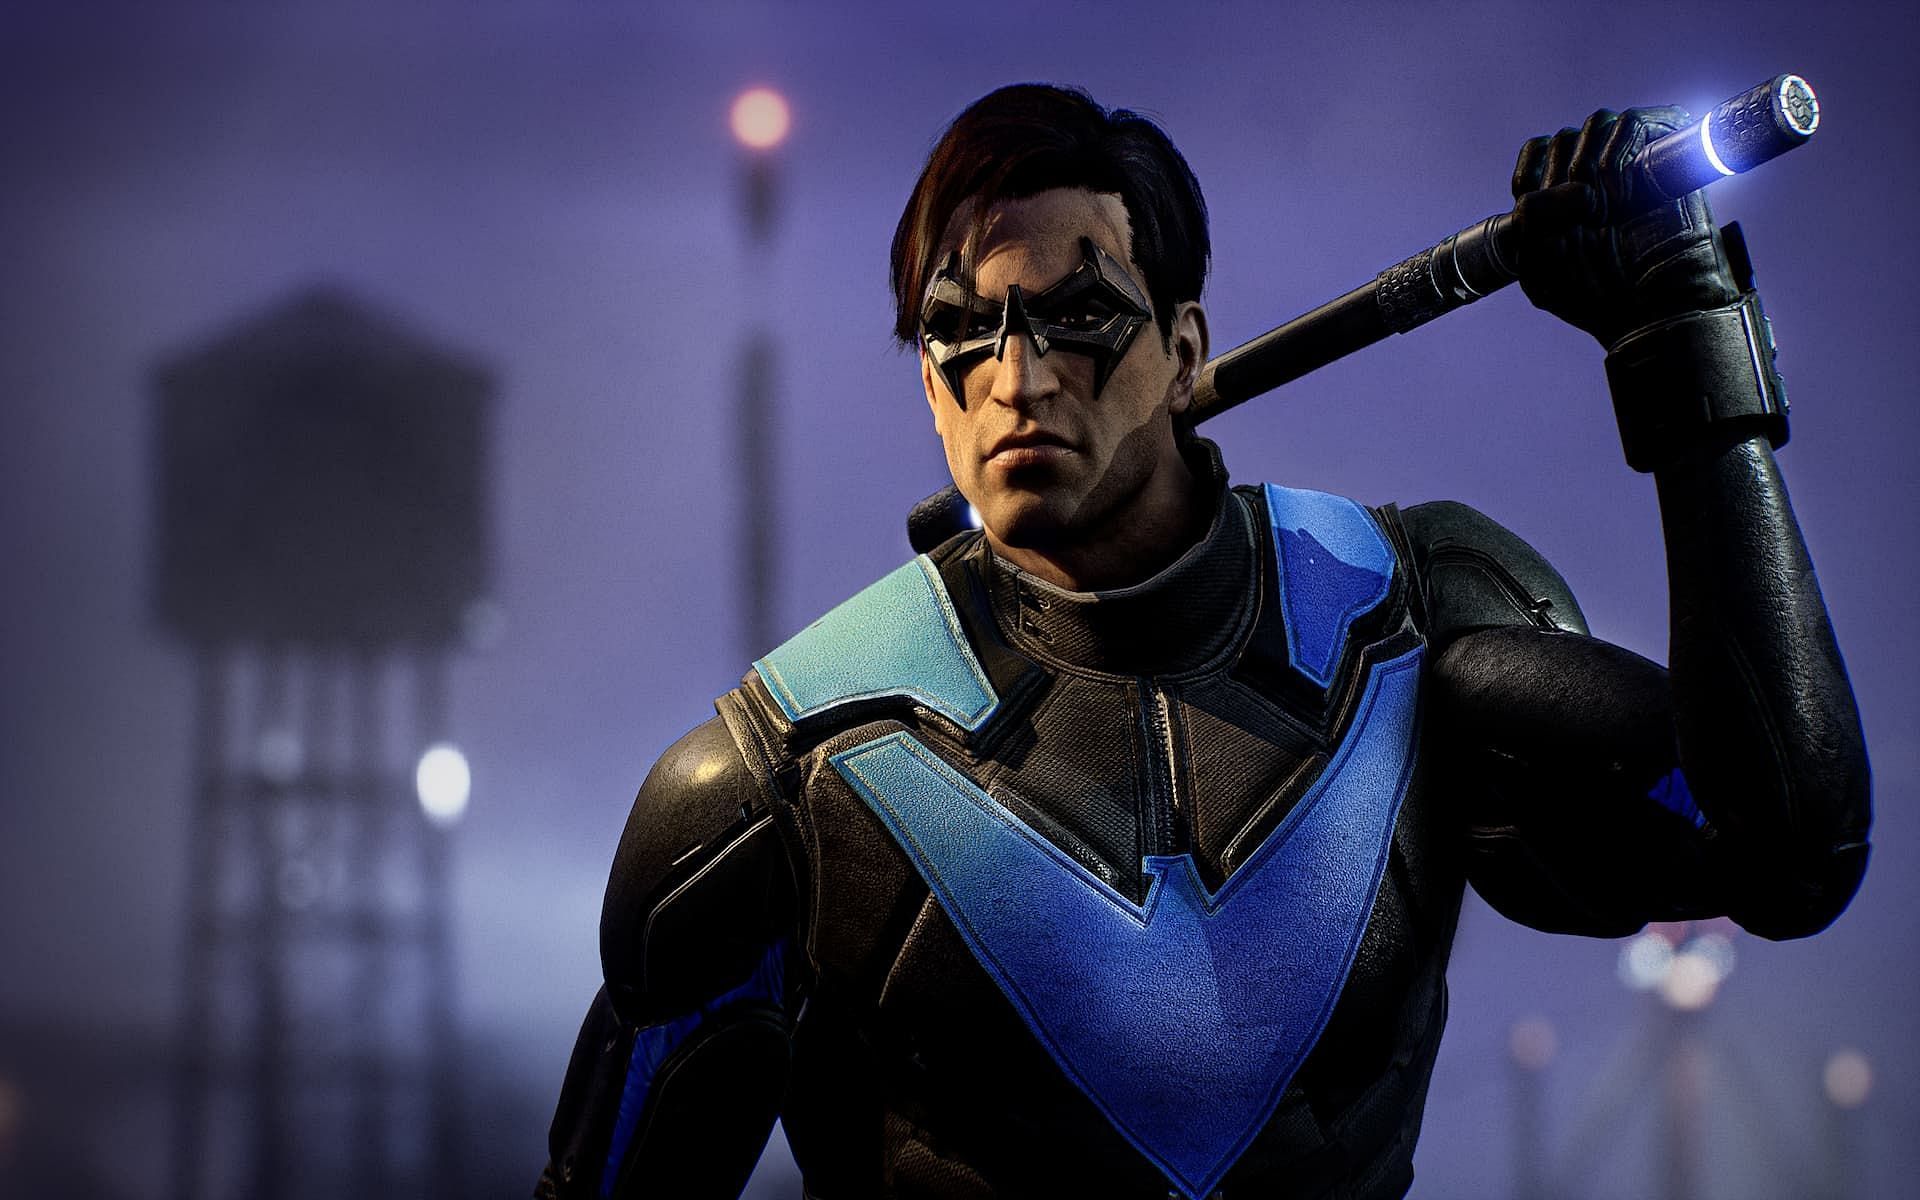 Nightwing takes the fight to his enemies up close or from afar (Image via WB Games Montreal)